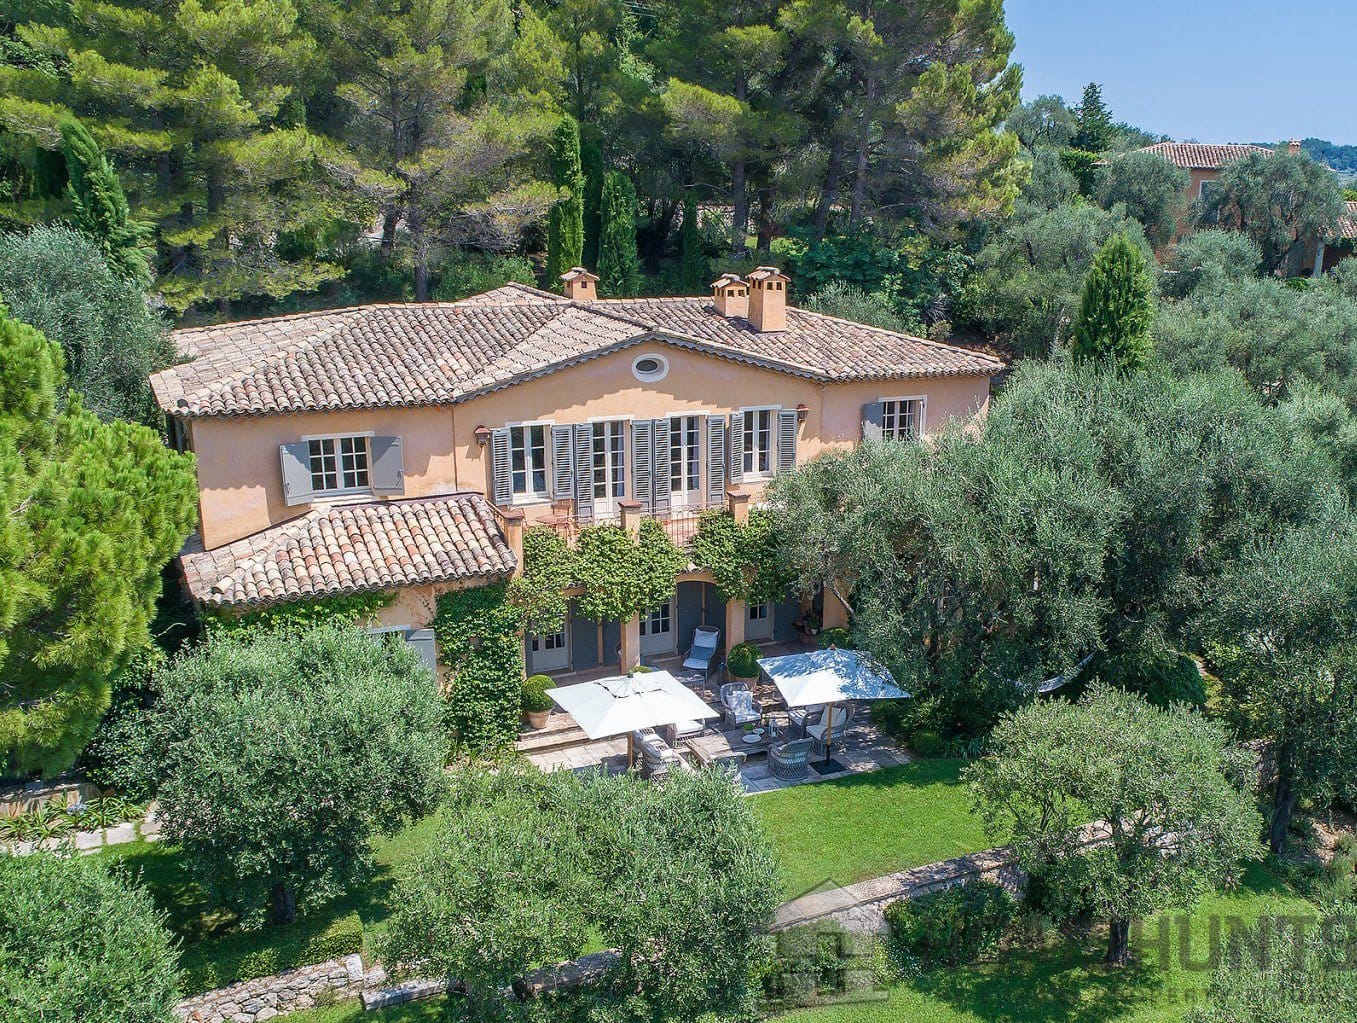 12 Bedroom Castle/Estates in Chateauneuf Grasse 4